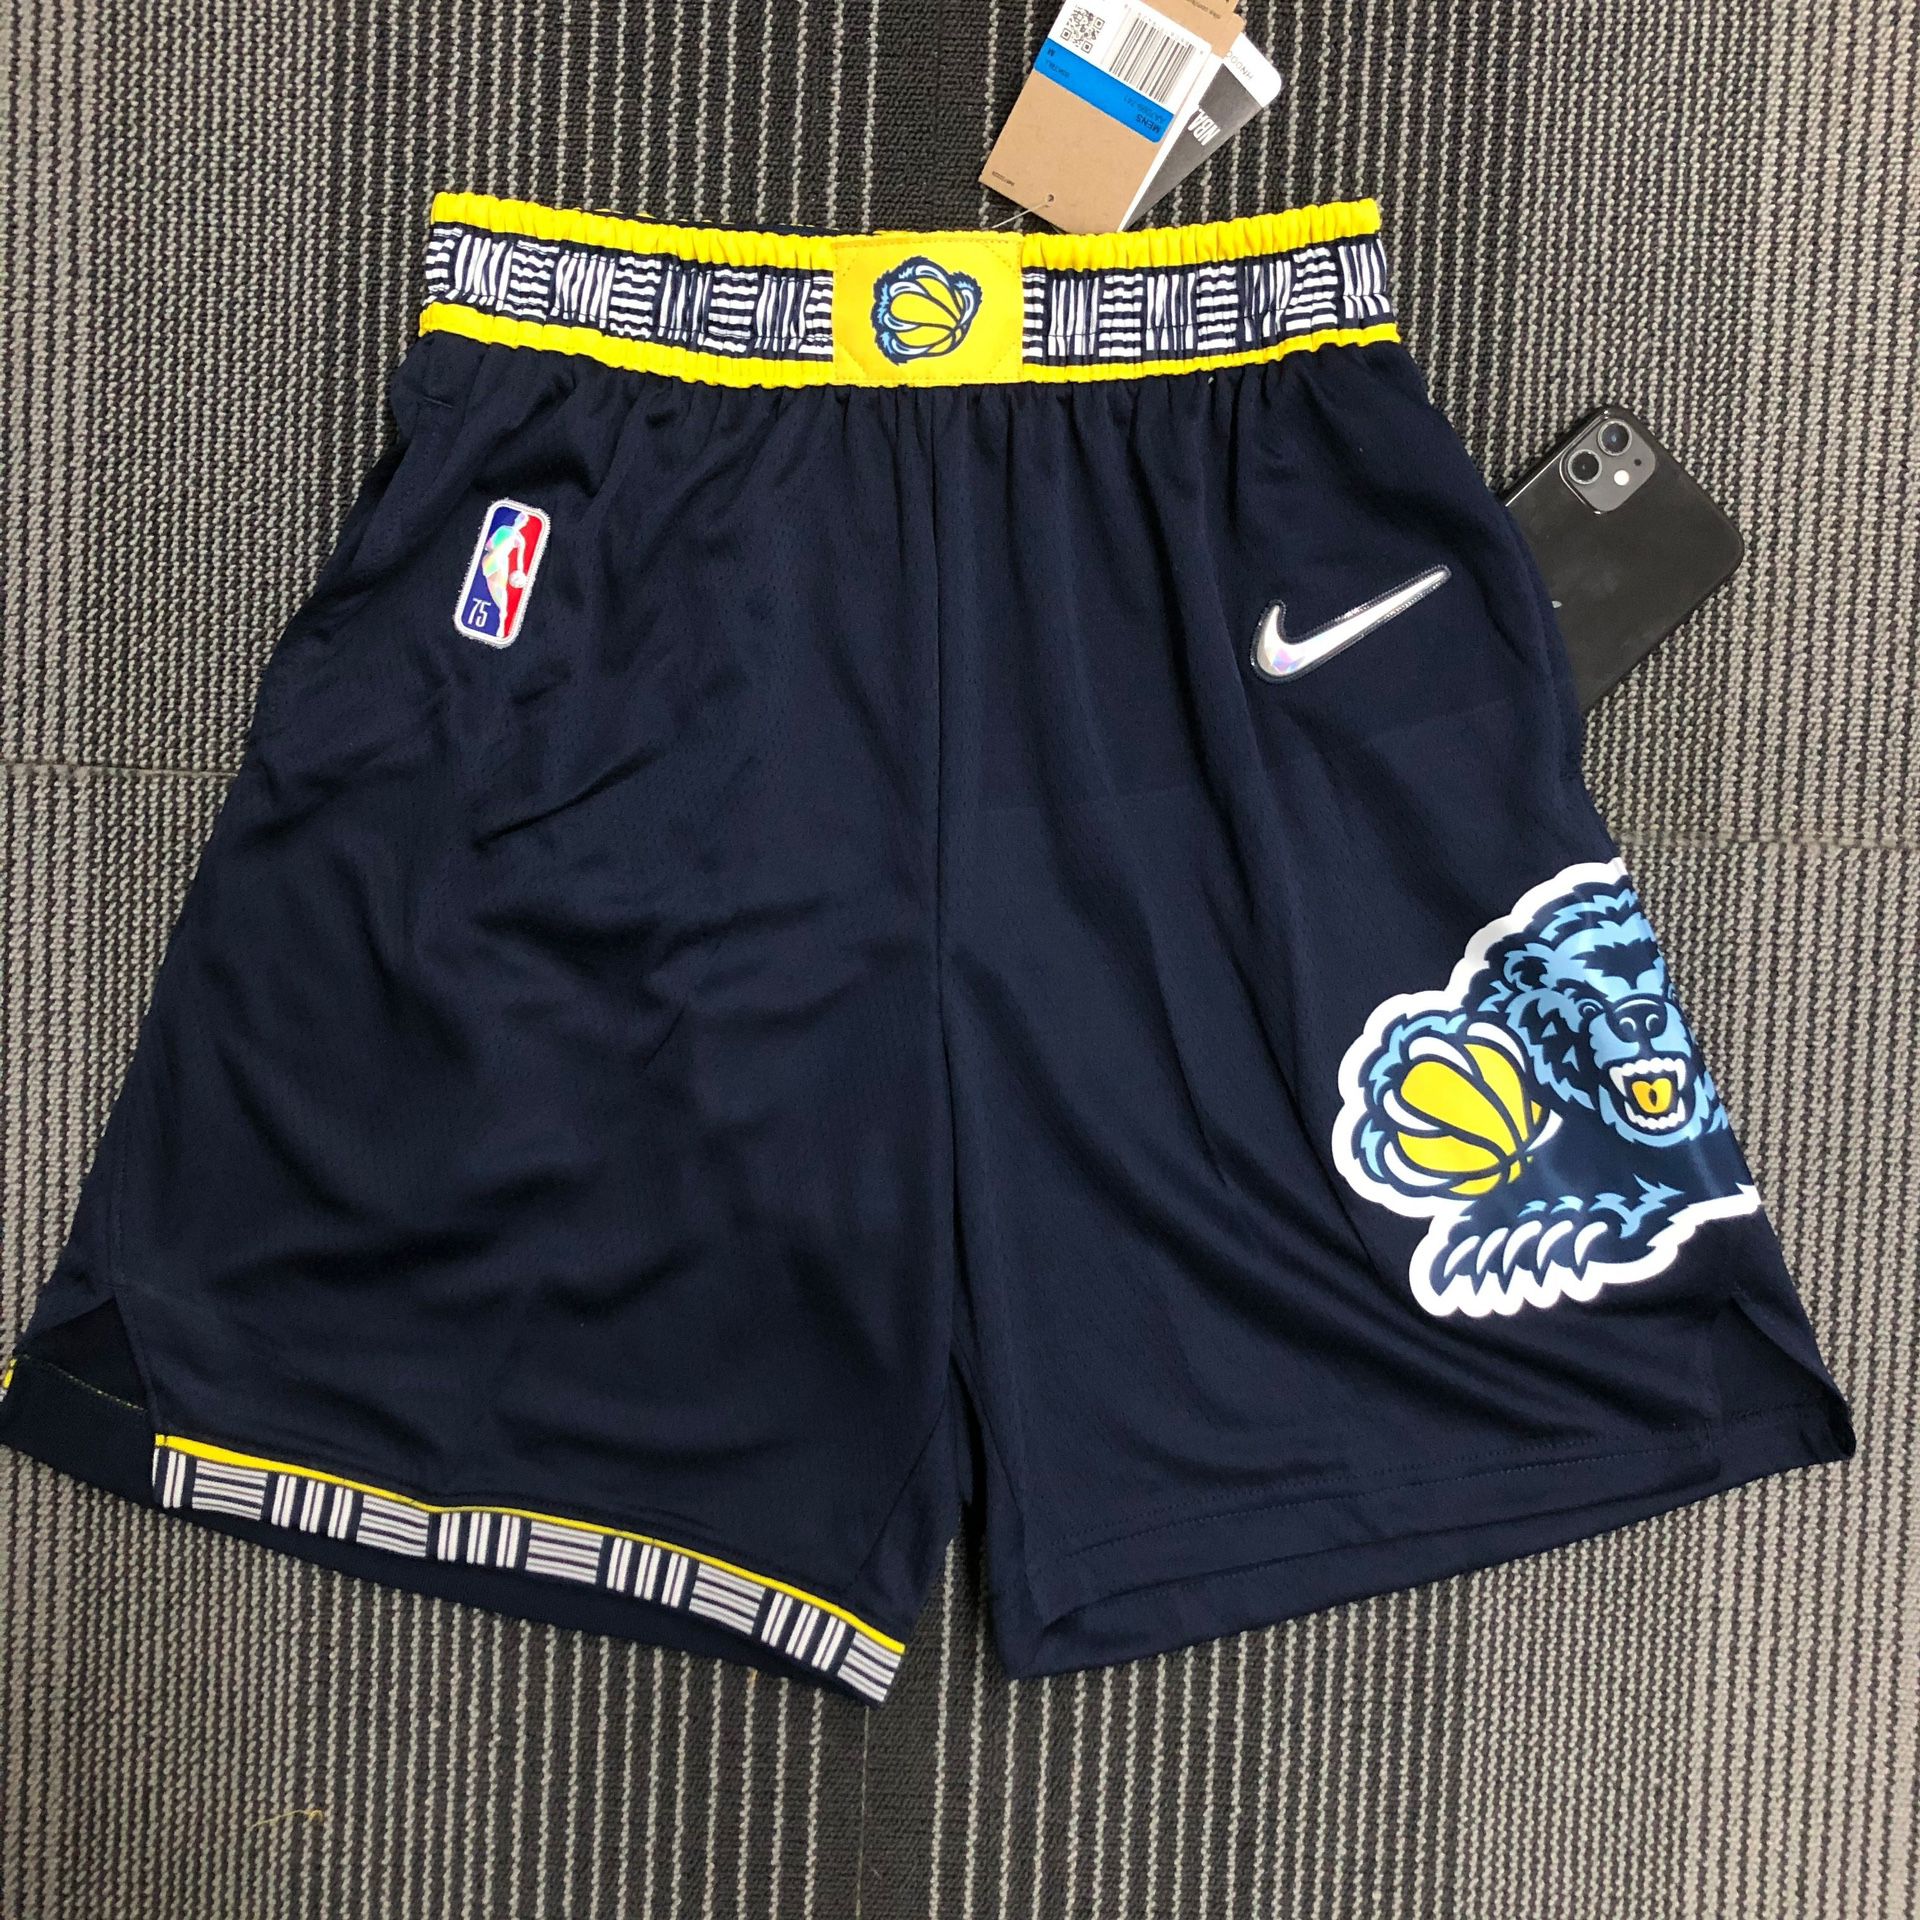 Memphis Grizzlies Hardwood Classic Shorts for Sale in Wheeling, IL - OfferUp